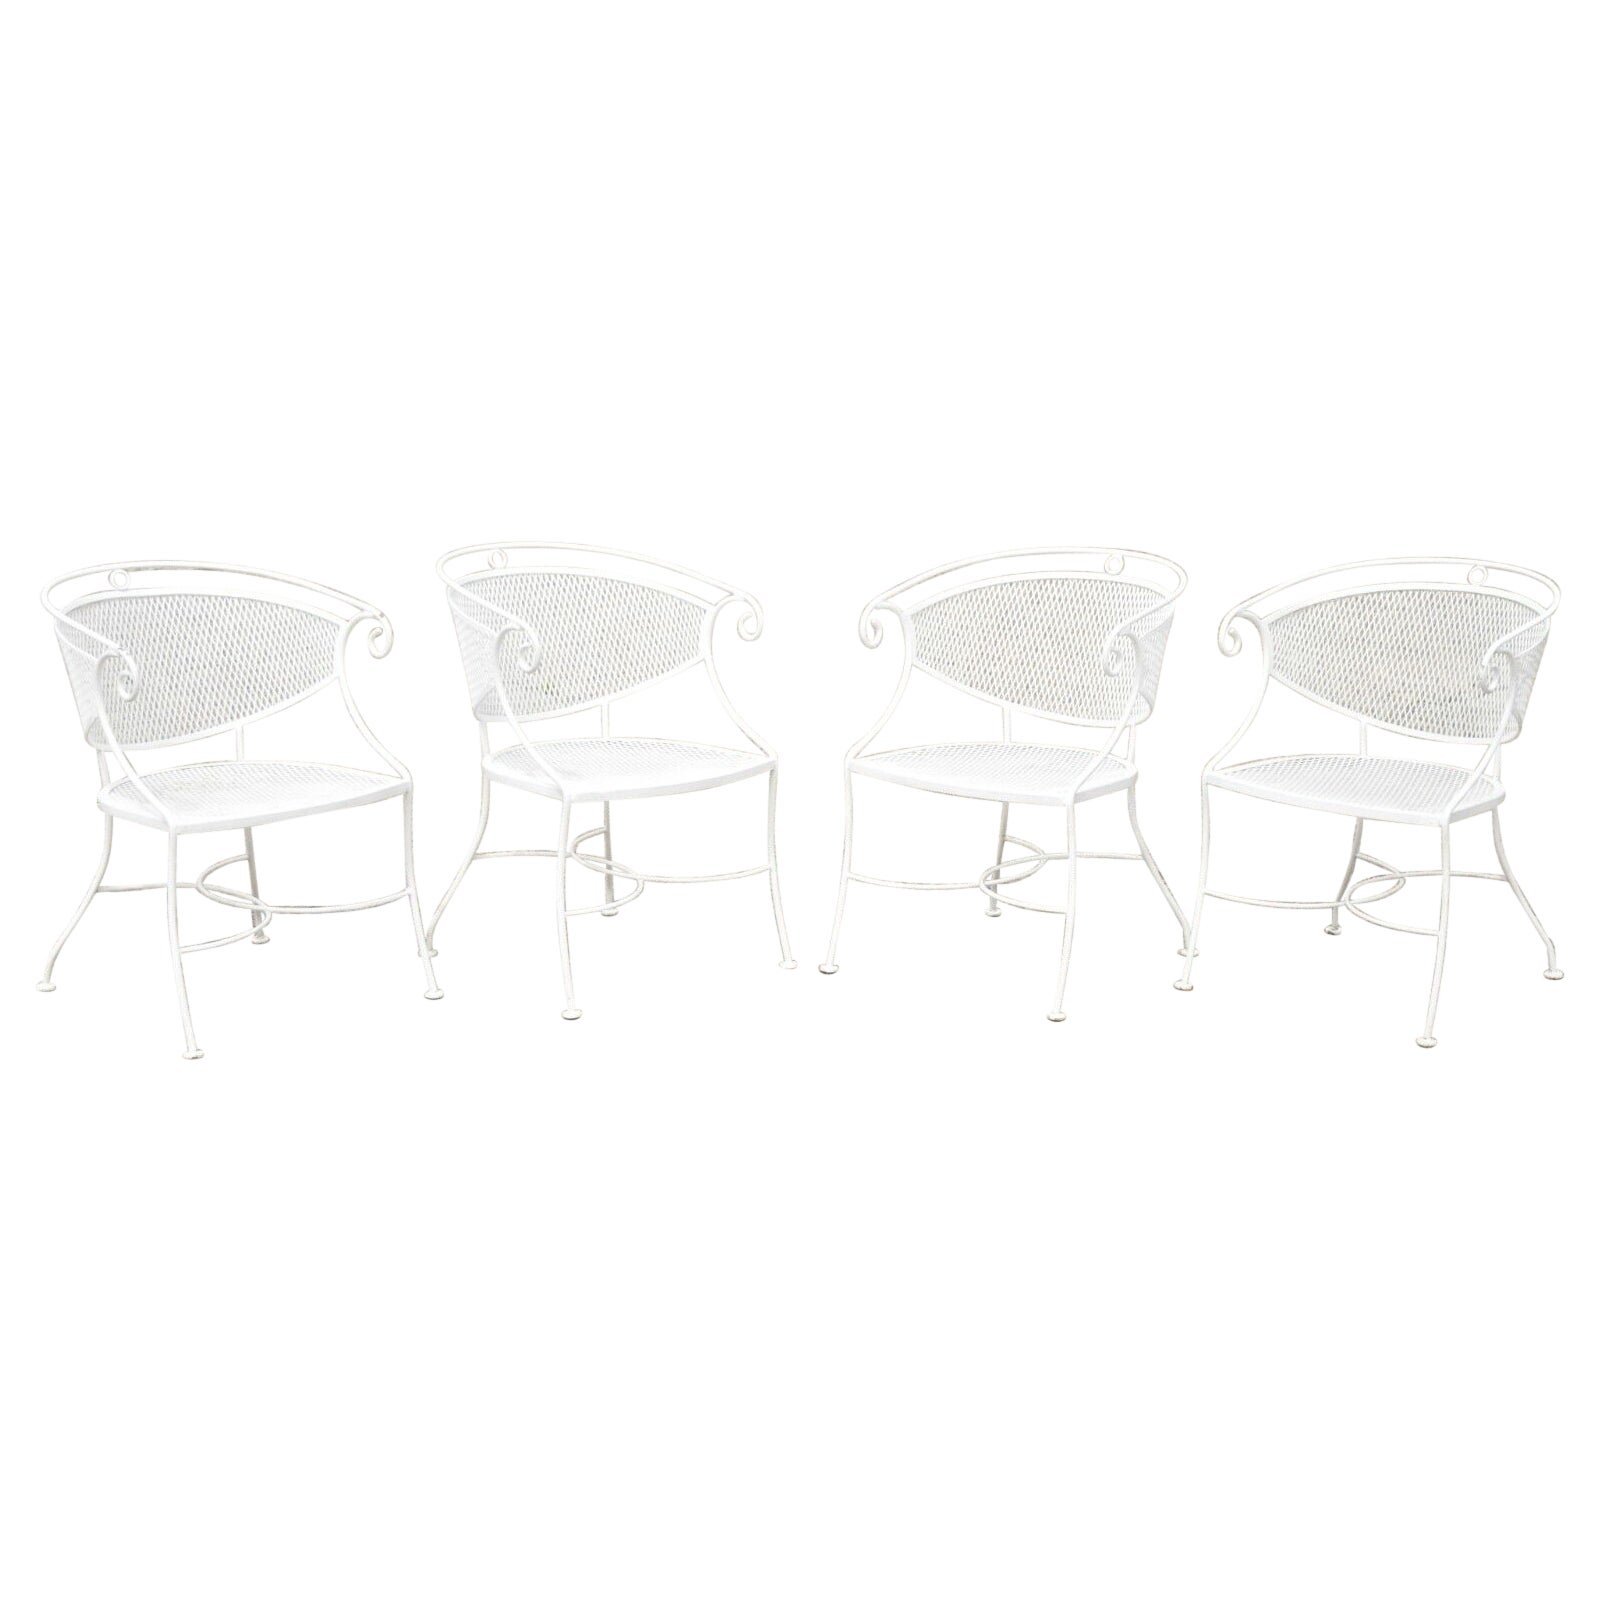 Vintage Hollywood Regency Scrolling Wrought Iron Barrel Back Chairs, Set of 4 For Sale